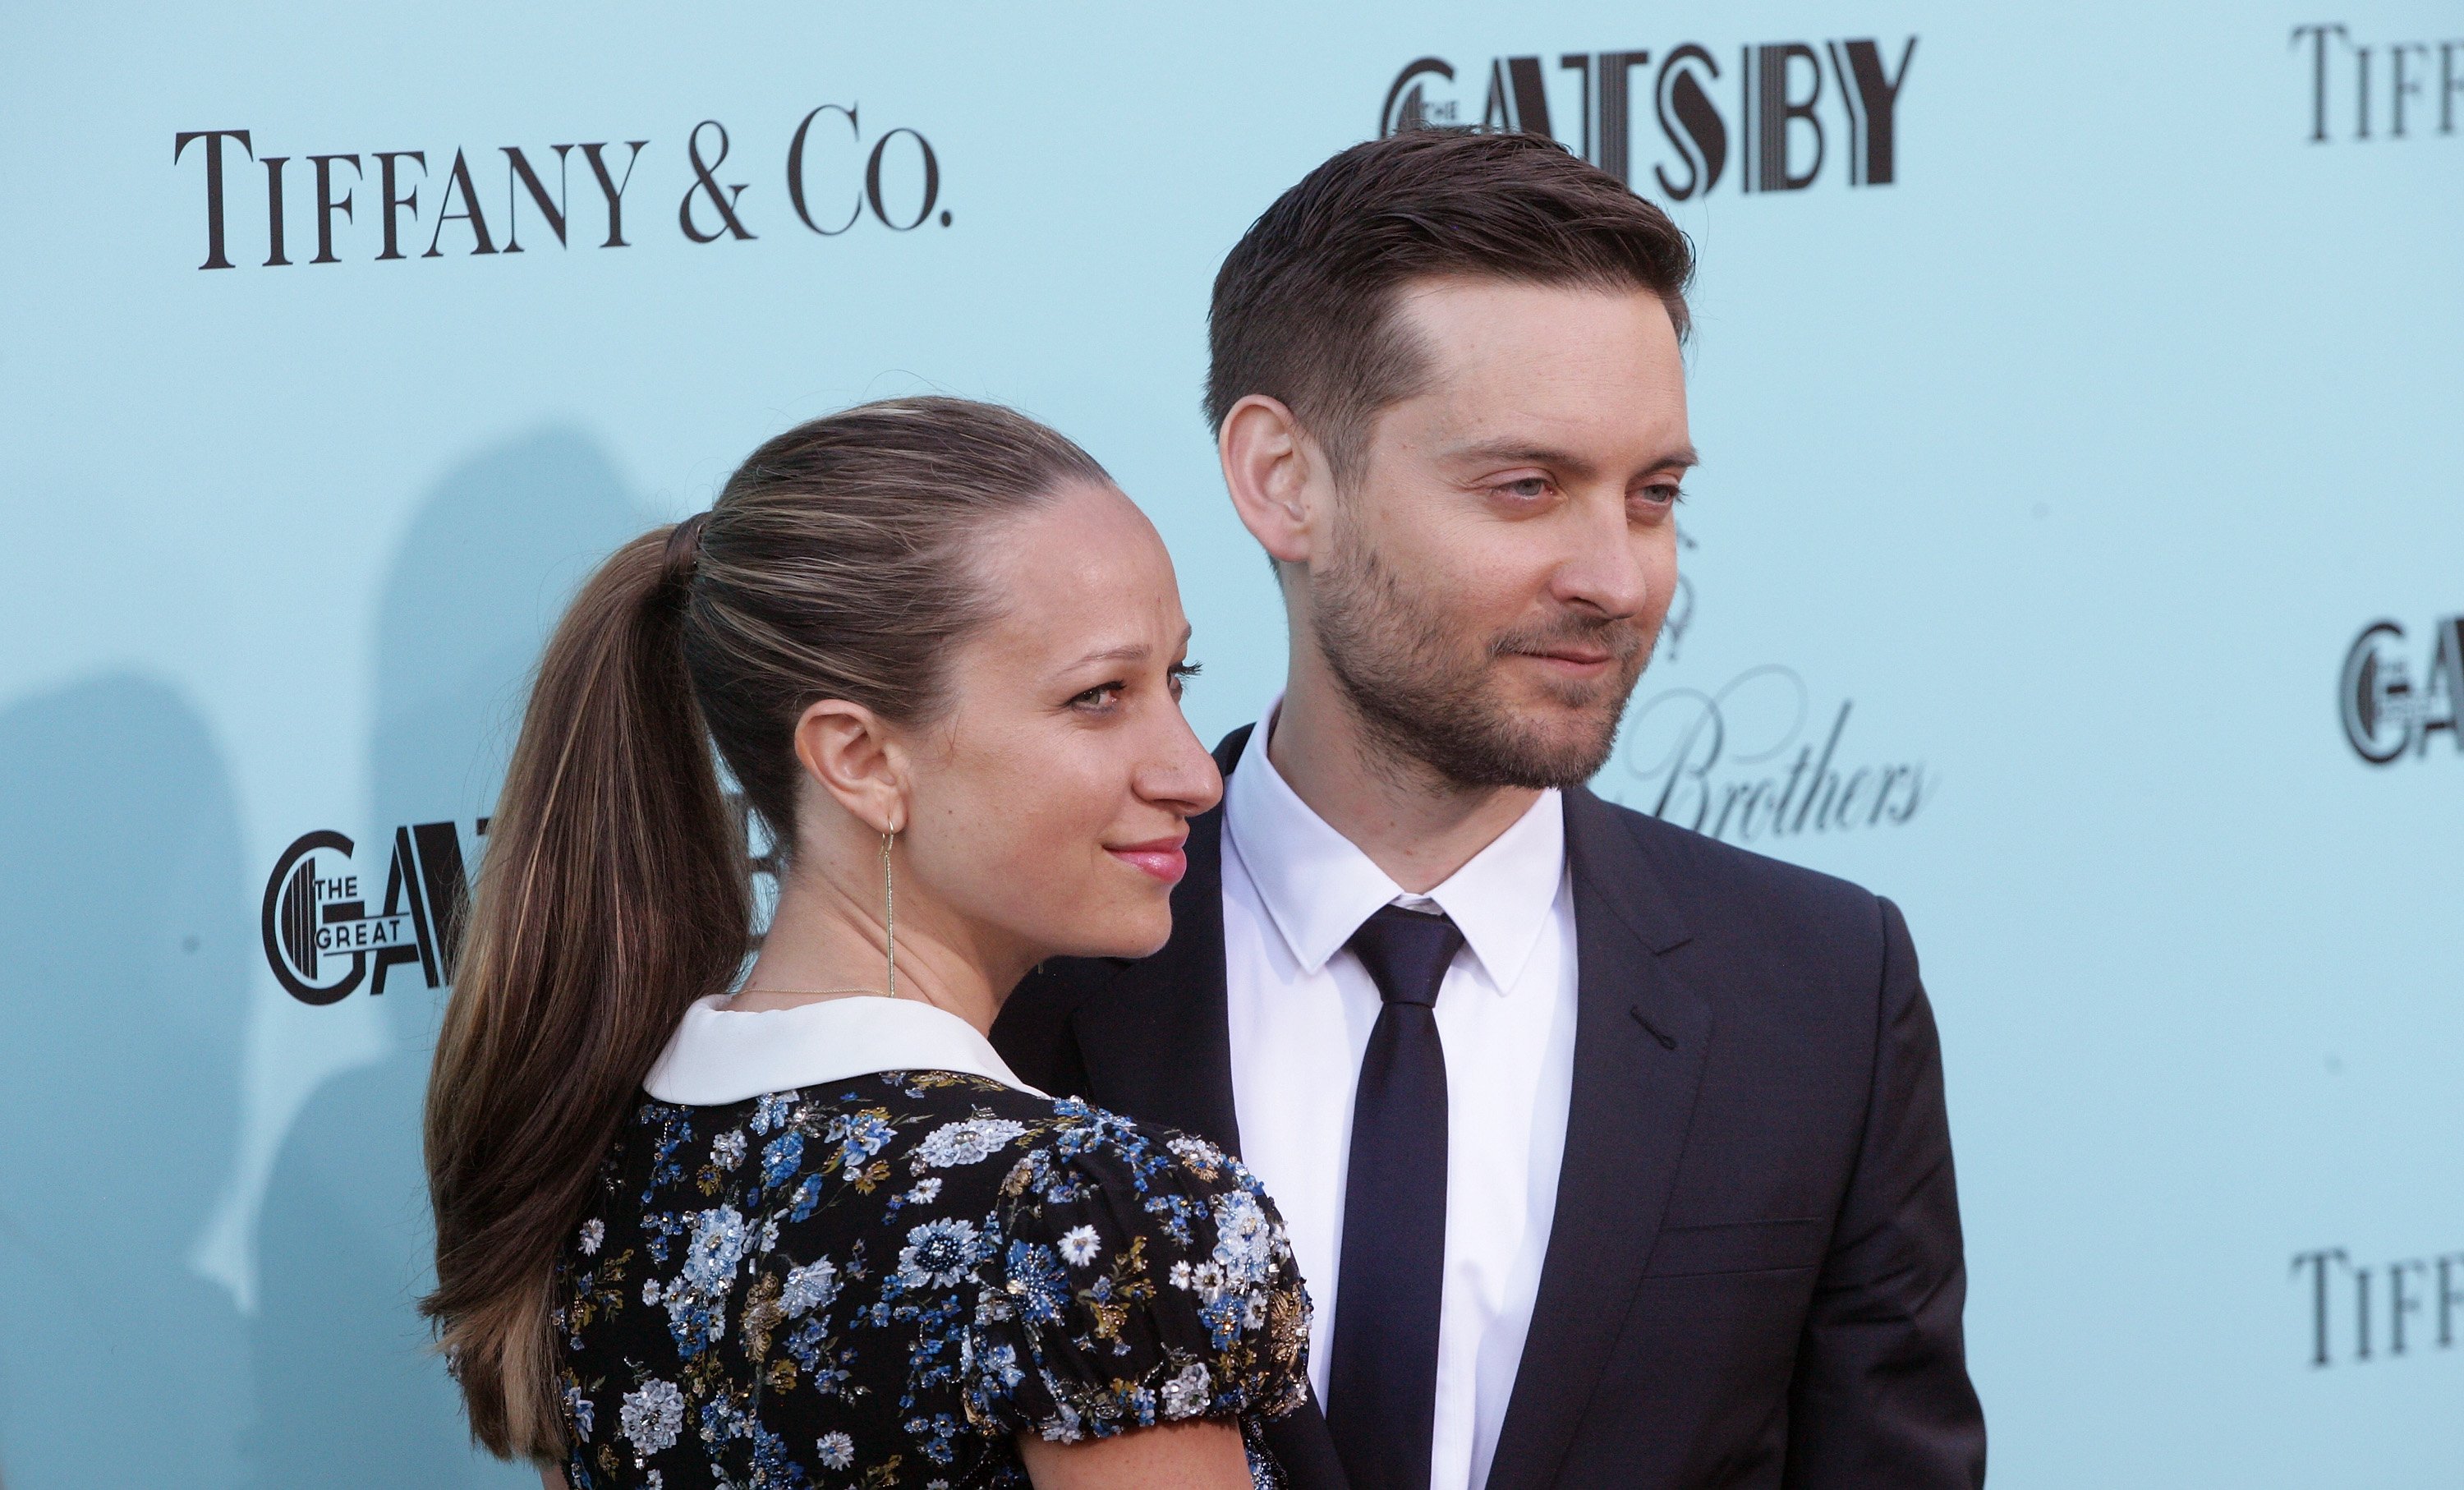 Tobey Maguire and Jennifer Meyer attend the "The Great Gatsby" world premiere at Avery Fisher at Lincoln Center for the Performing Arts on May 1, 2013, in New York City. | Source: Getty Images